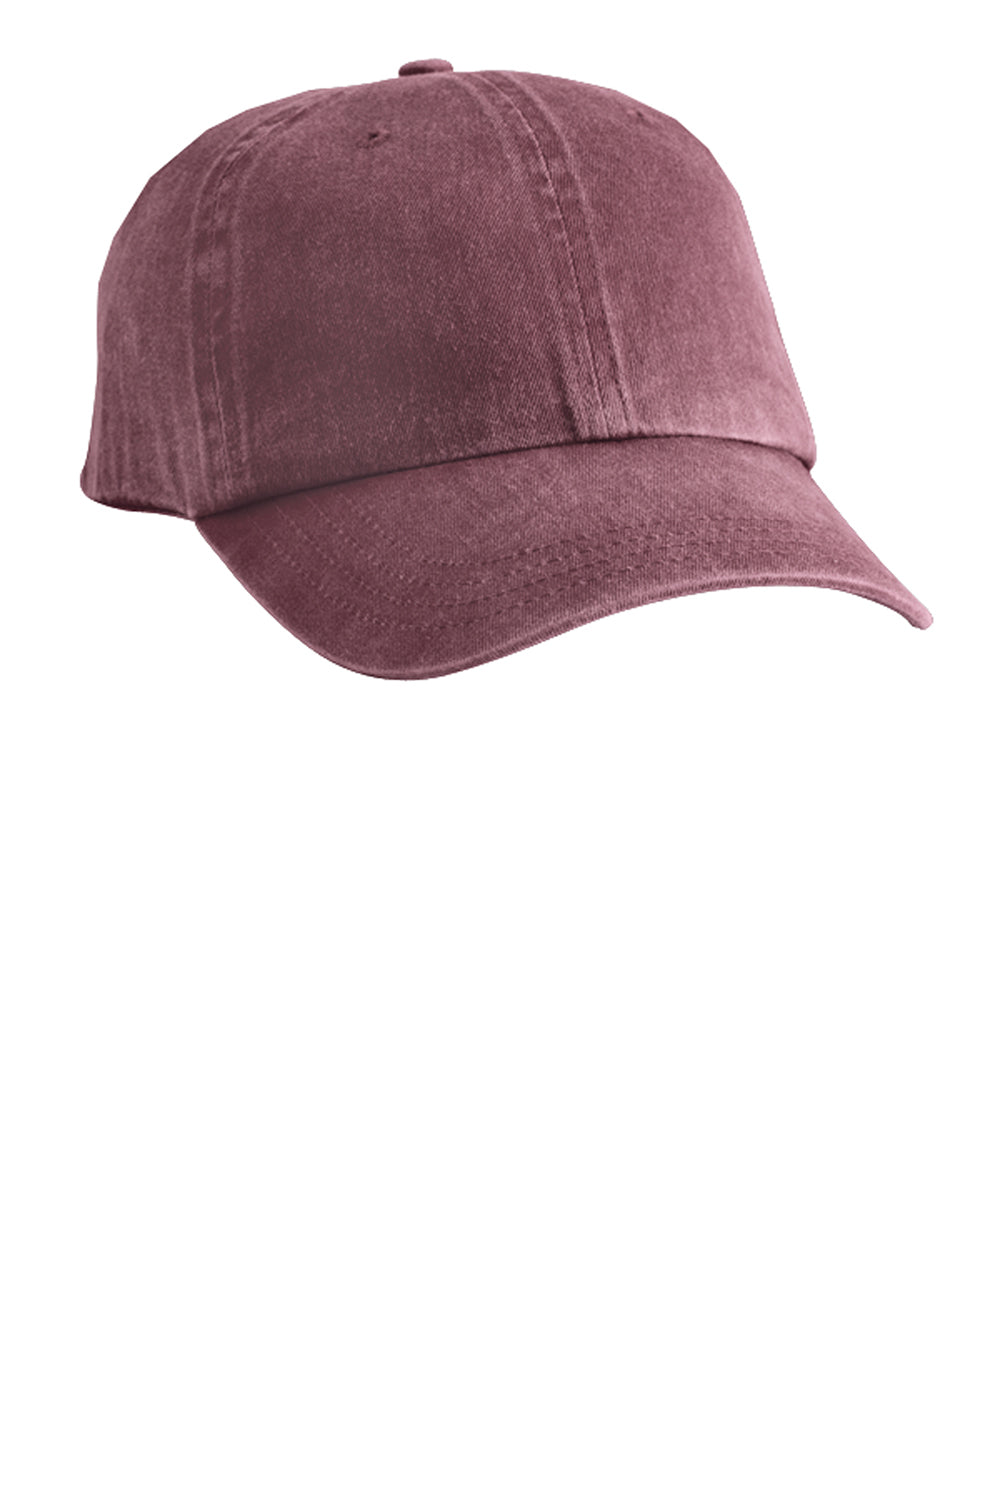 Port & Company CP84 Mens Adjustable Hat Maroon Front